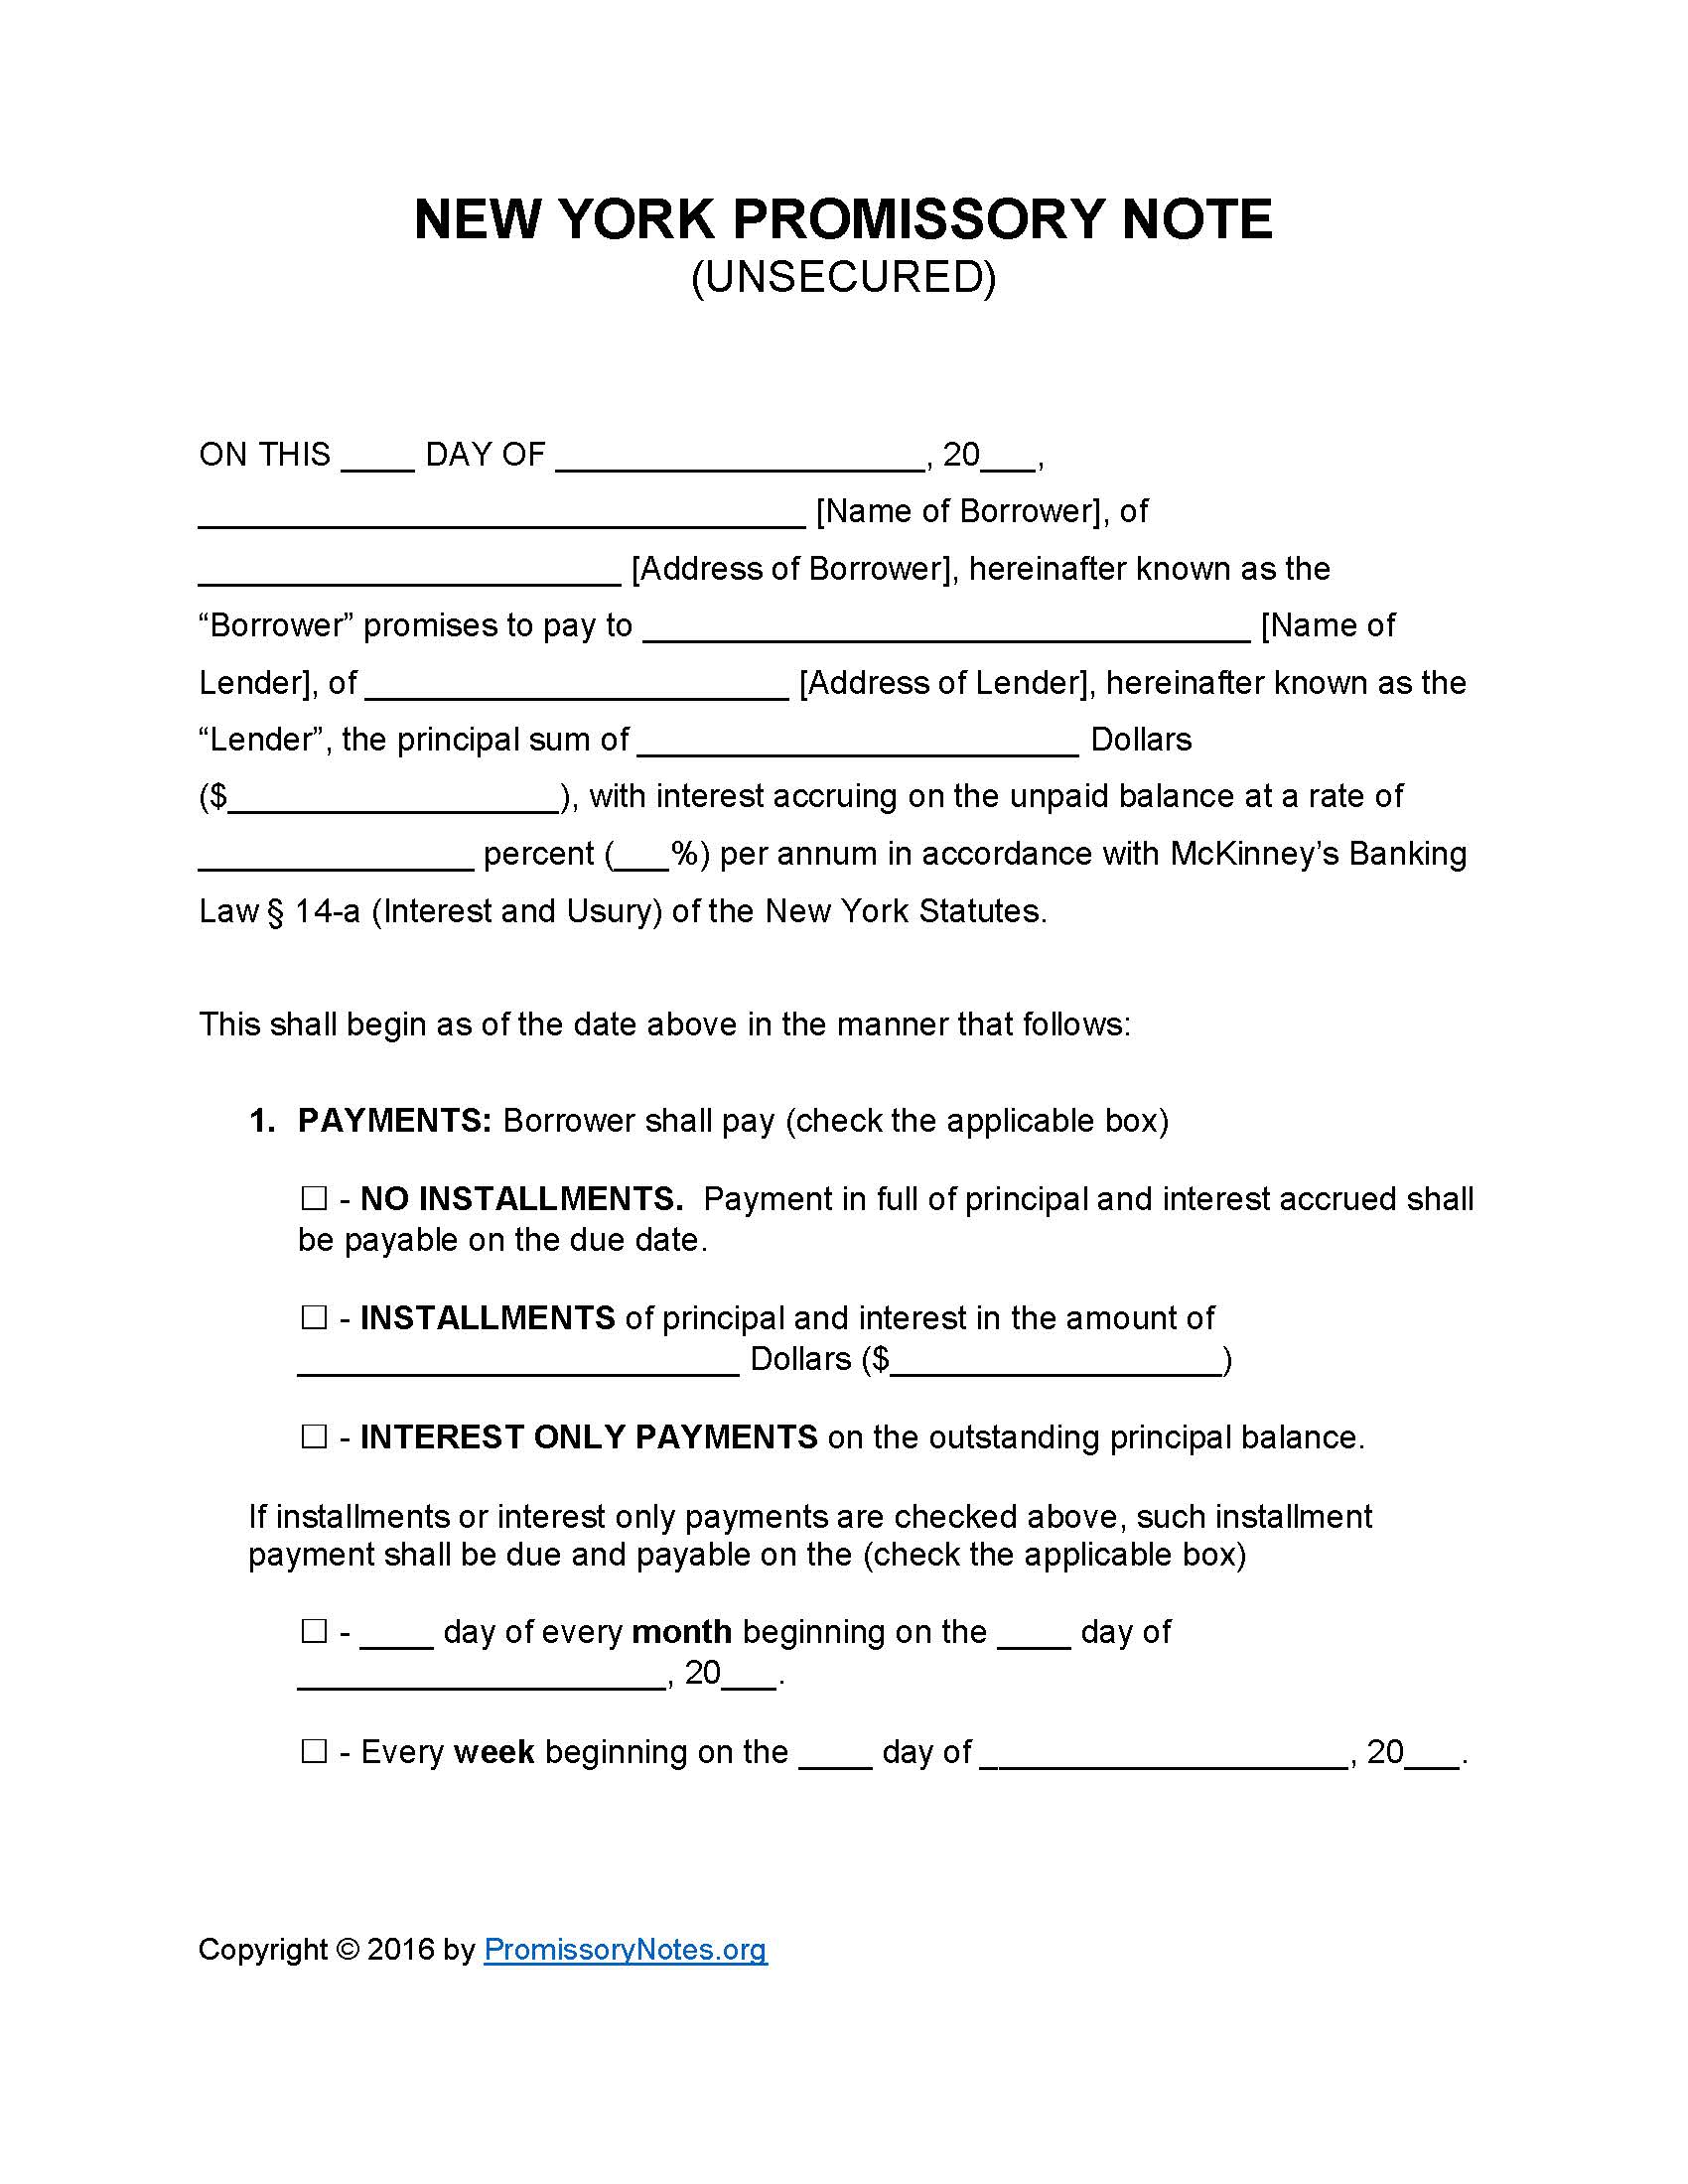 new-york-unsecured-promissory-note-form